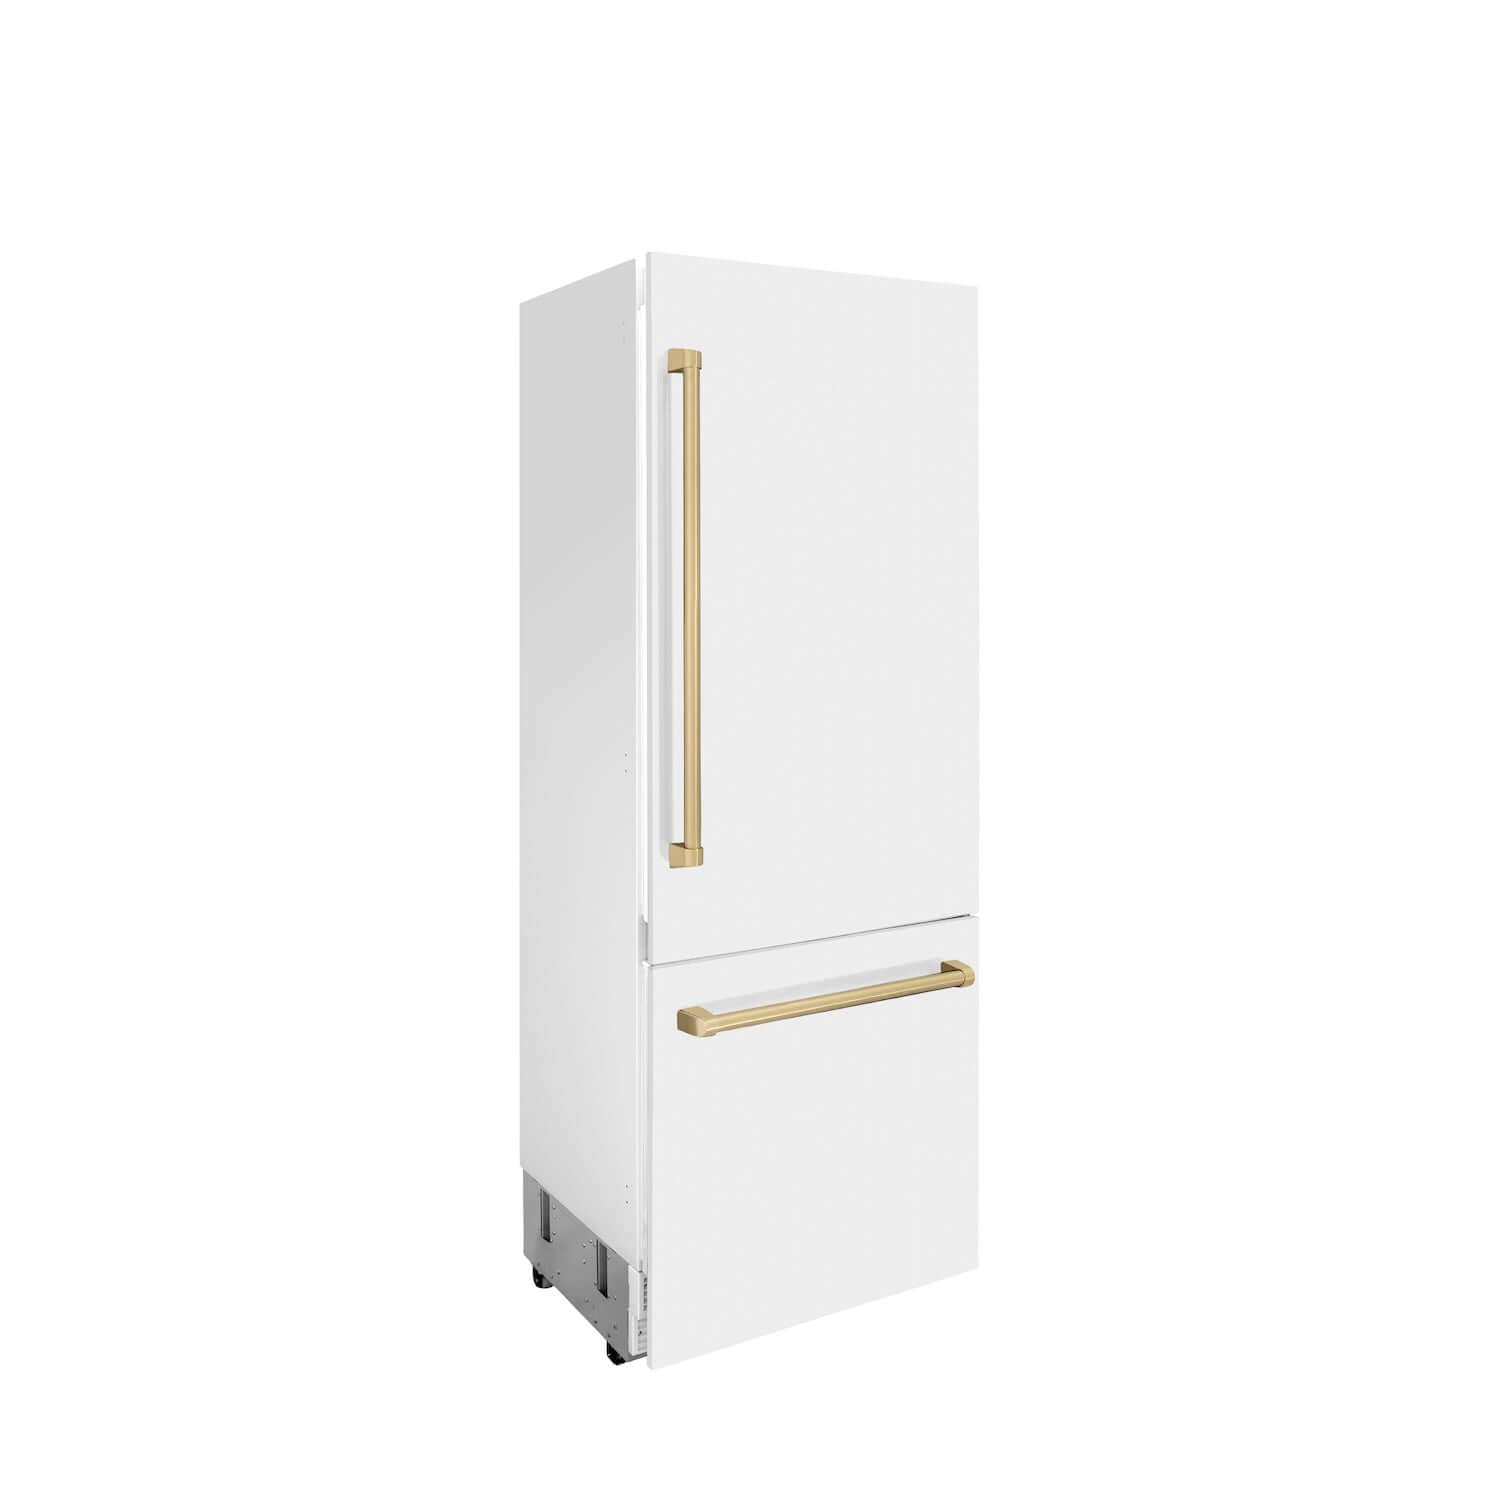 ZLINE Autograph Edition 30 in. 16.1 cu. ft. Built-in 2-Door Bottom Freezer Refrigerator with Internal Water and Ice Dispenser in White Matte with Champagne Bronze Accents (RBIVZ-WM-30-CB) side, closed.